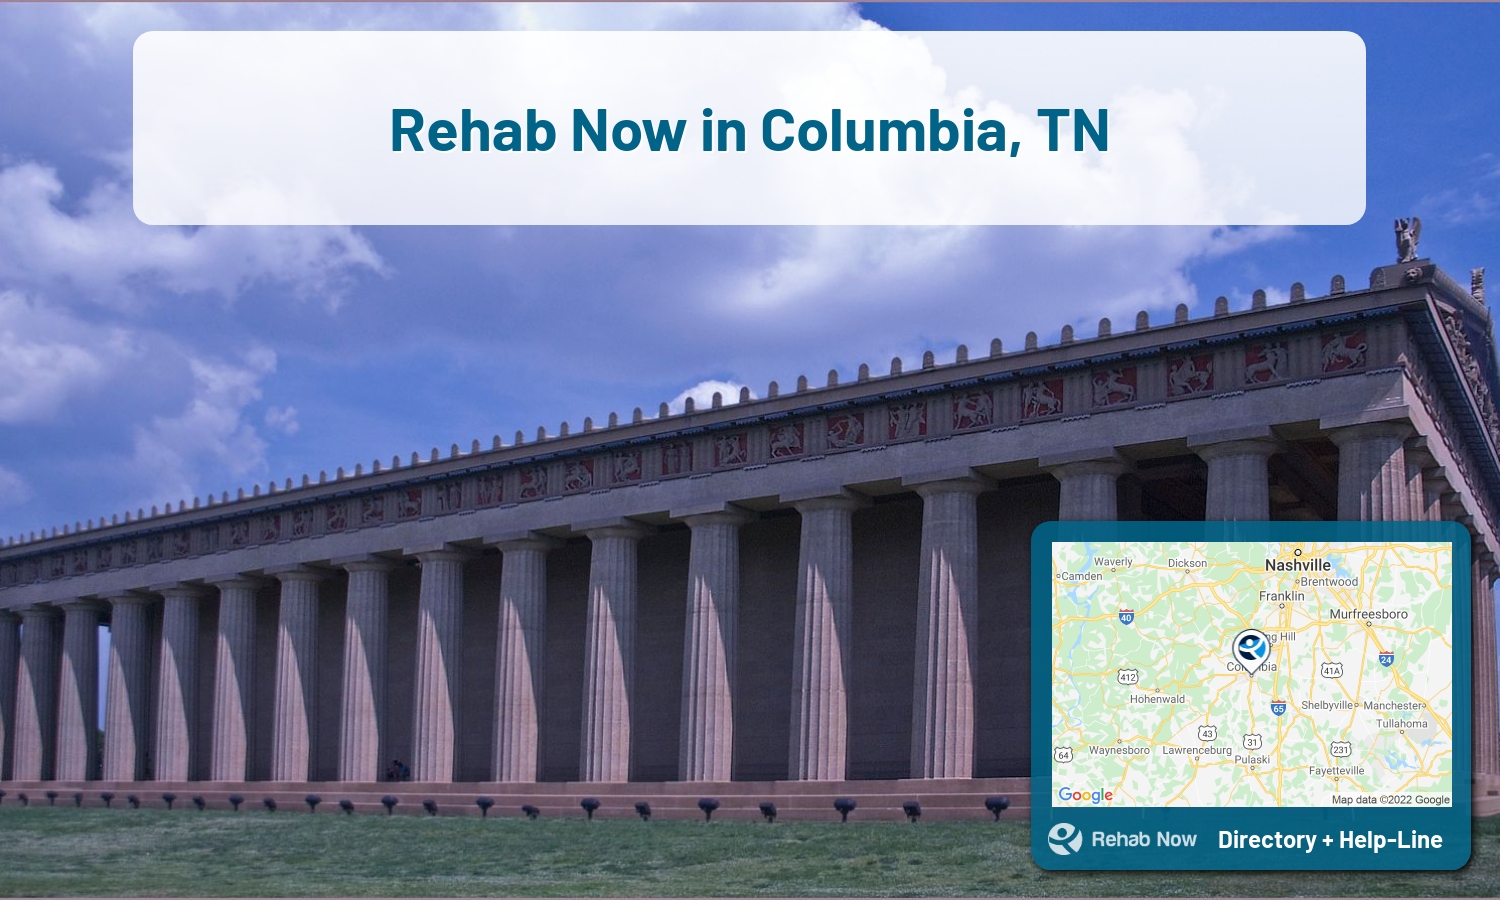 Find drug rehab and alcohol treatment services in Columbia. Our experts help you find a center in Columbia, Tennessee